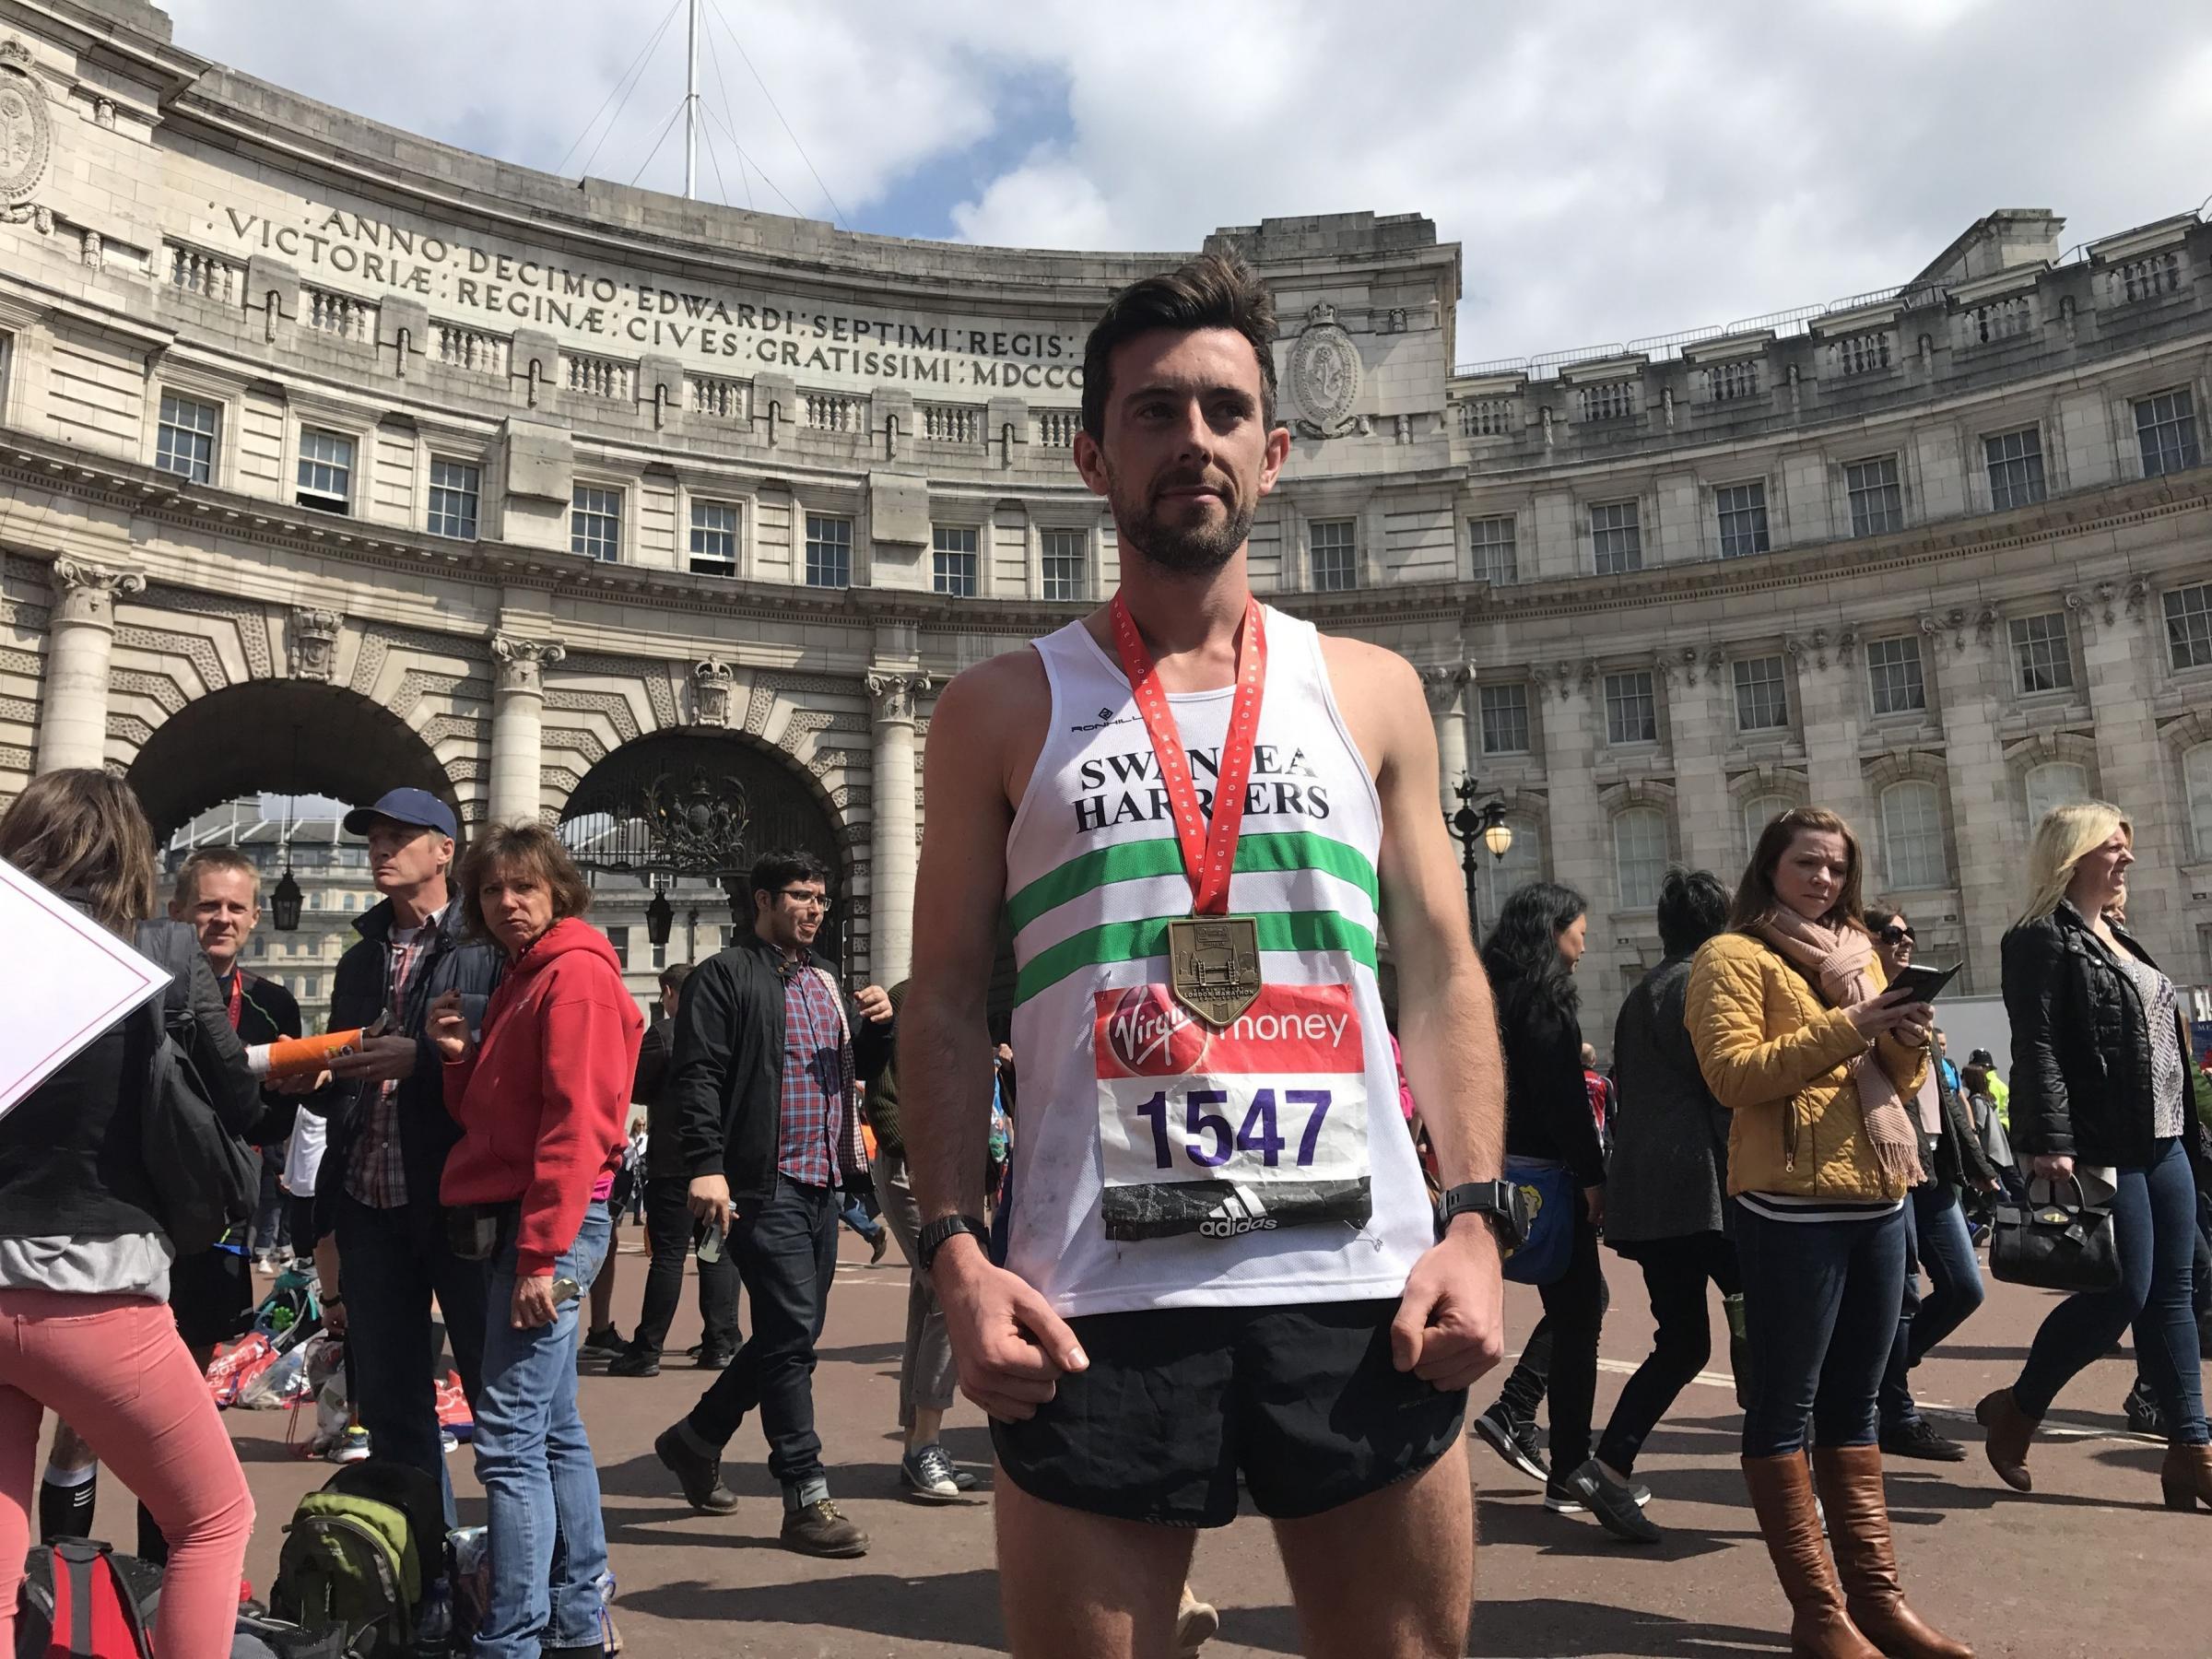 Runner helping exhausted athlete over finishing line 'is what London Marathon is all about'